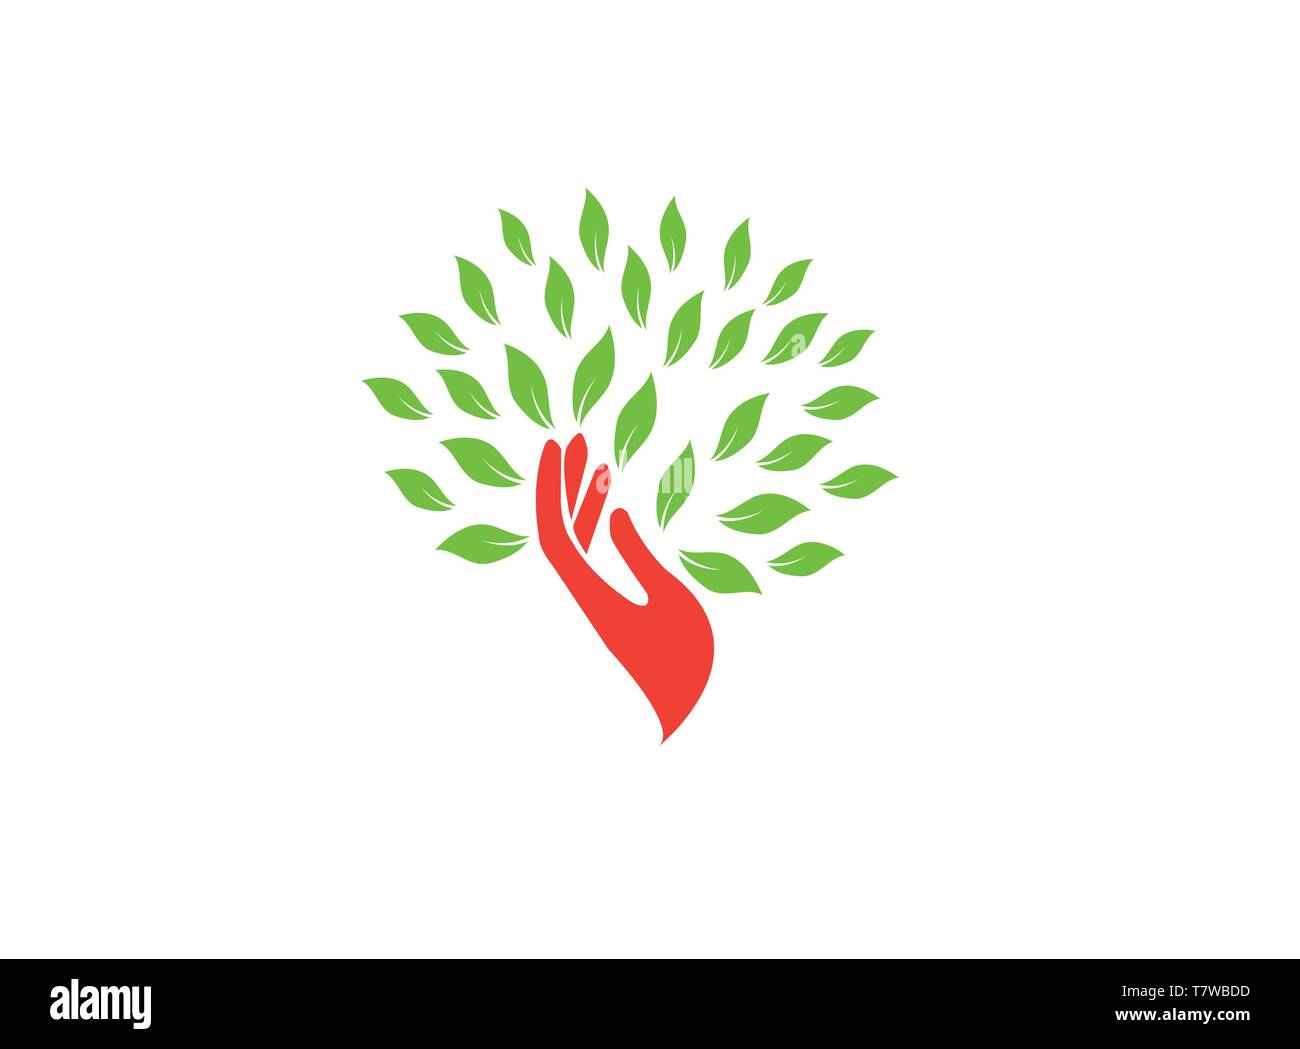 Tree trunk hand and green leaves logo design illustrator, nature icon Stock Vector